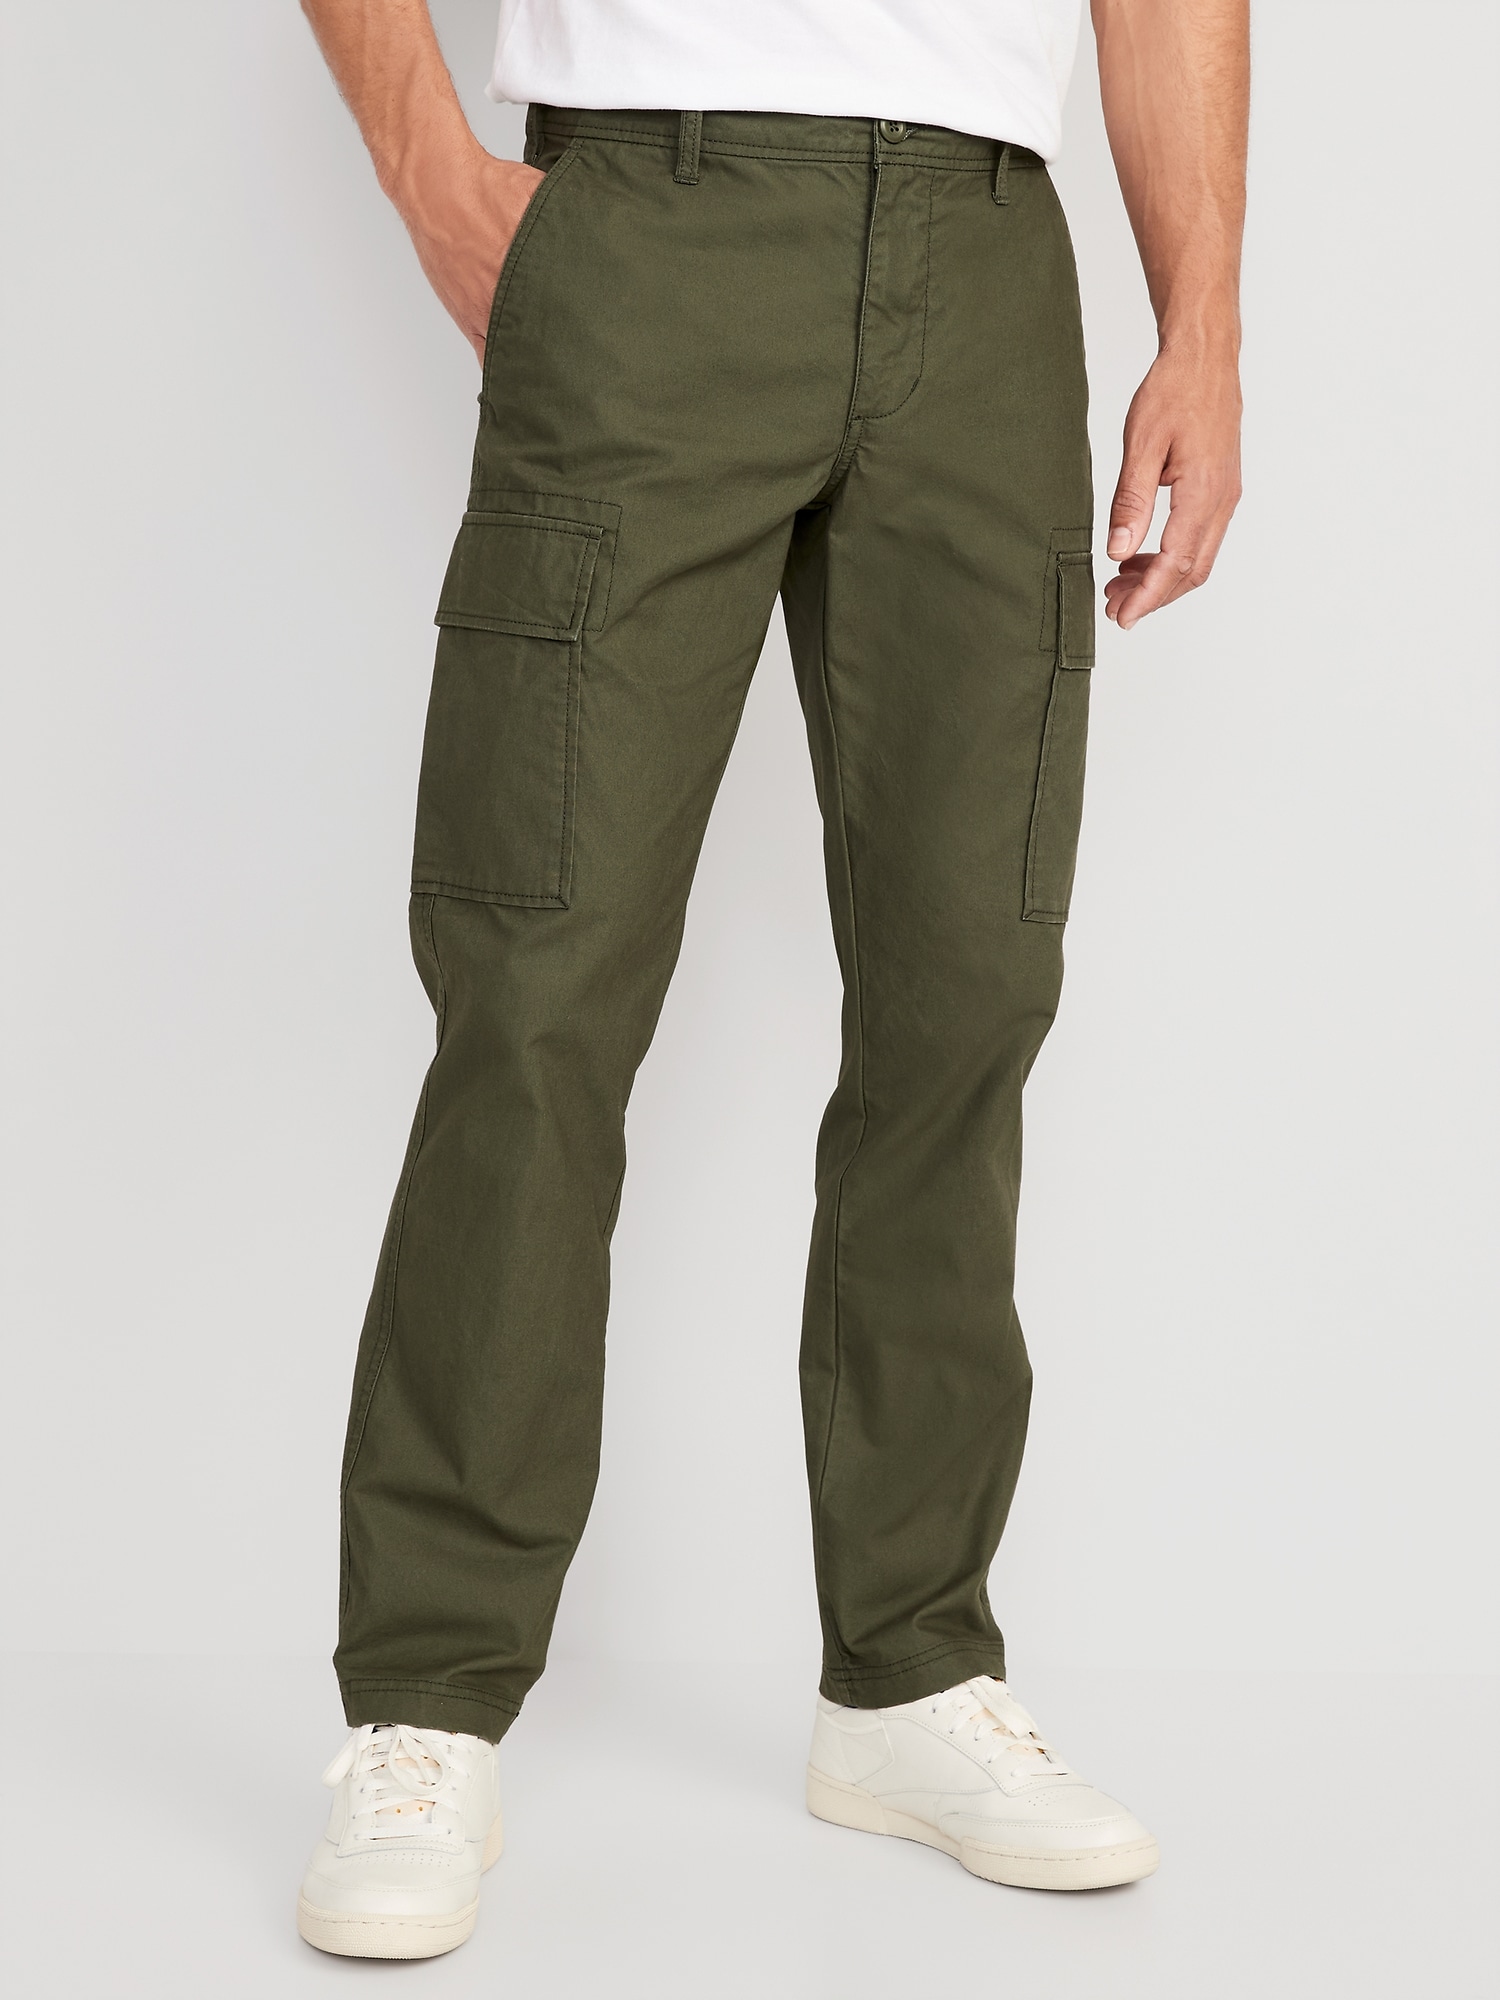 Old Navy Men's Straight Oxford Cargo Pants - - Size 42W